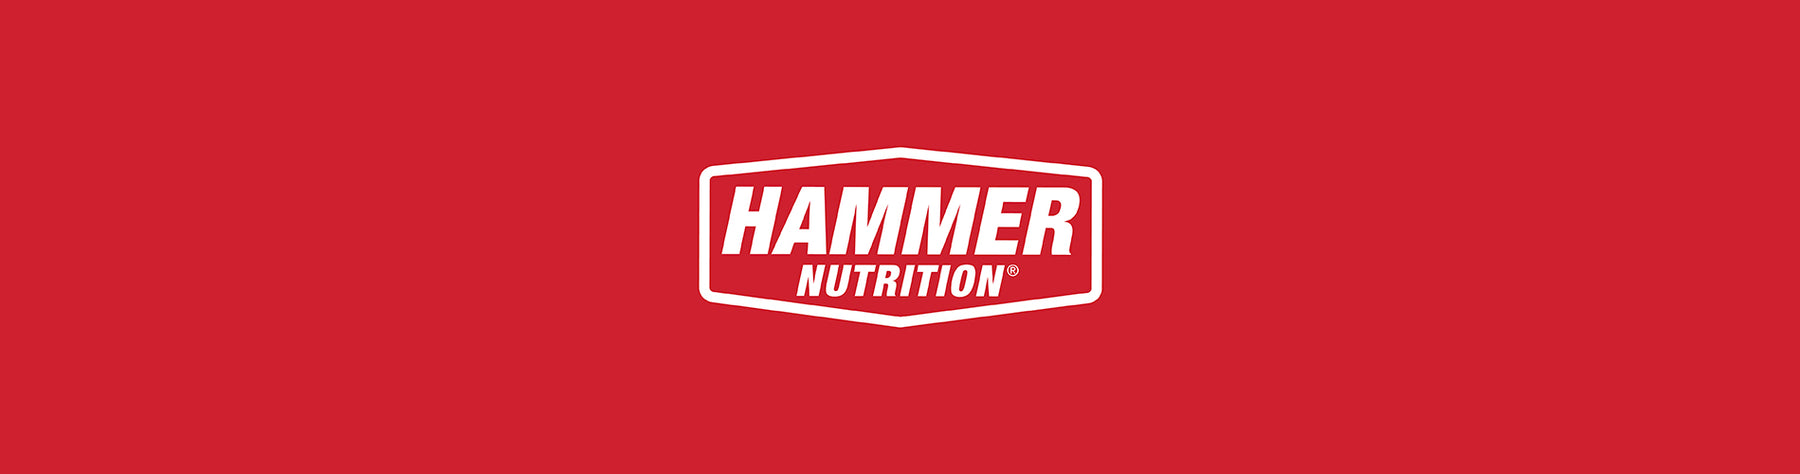 Hammer Nutrition: The Key to Optimal Athletic Performance